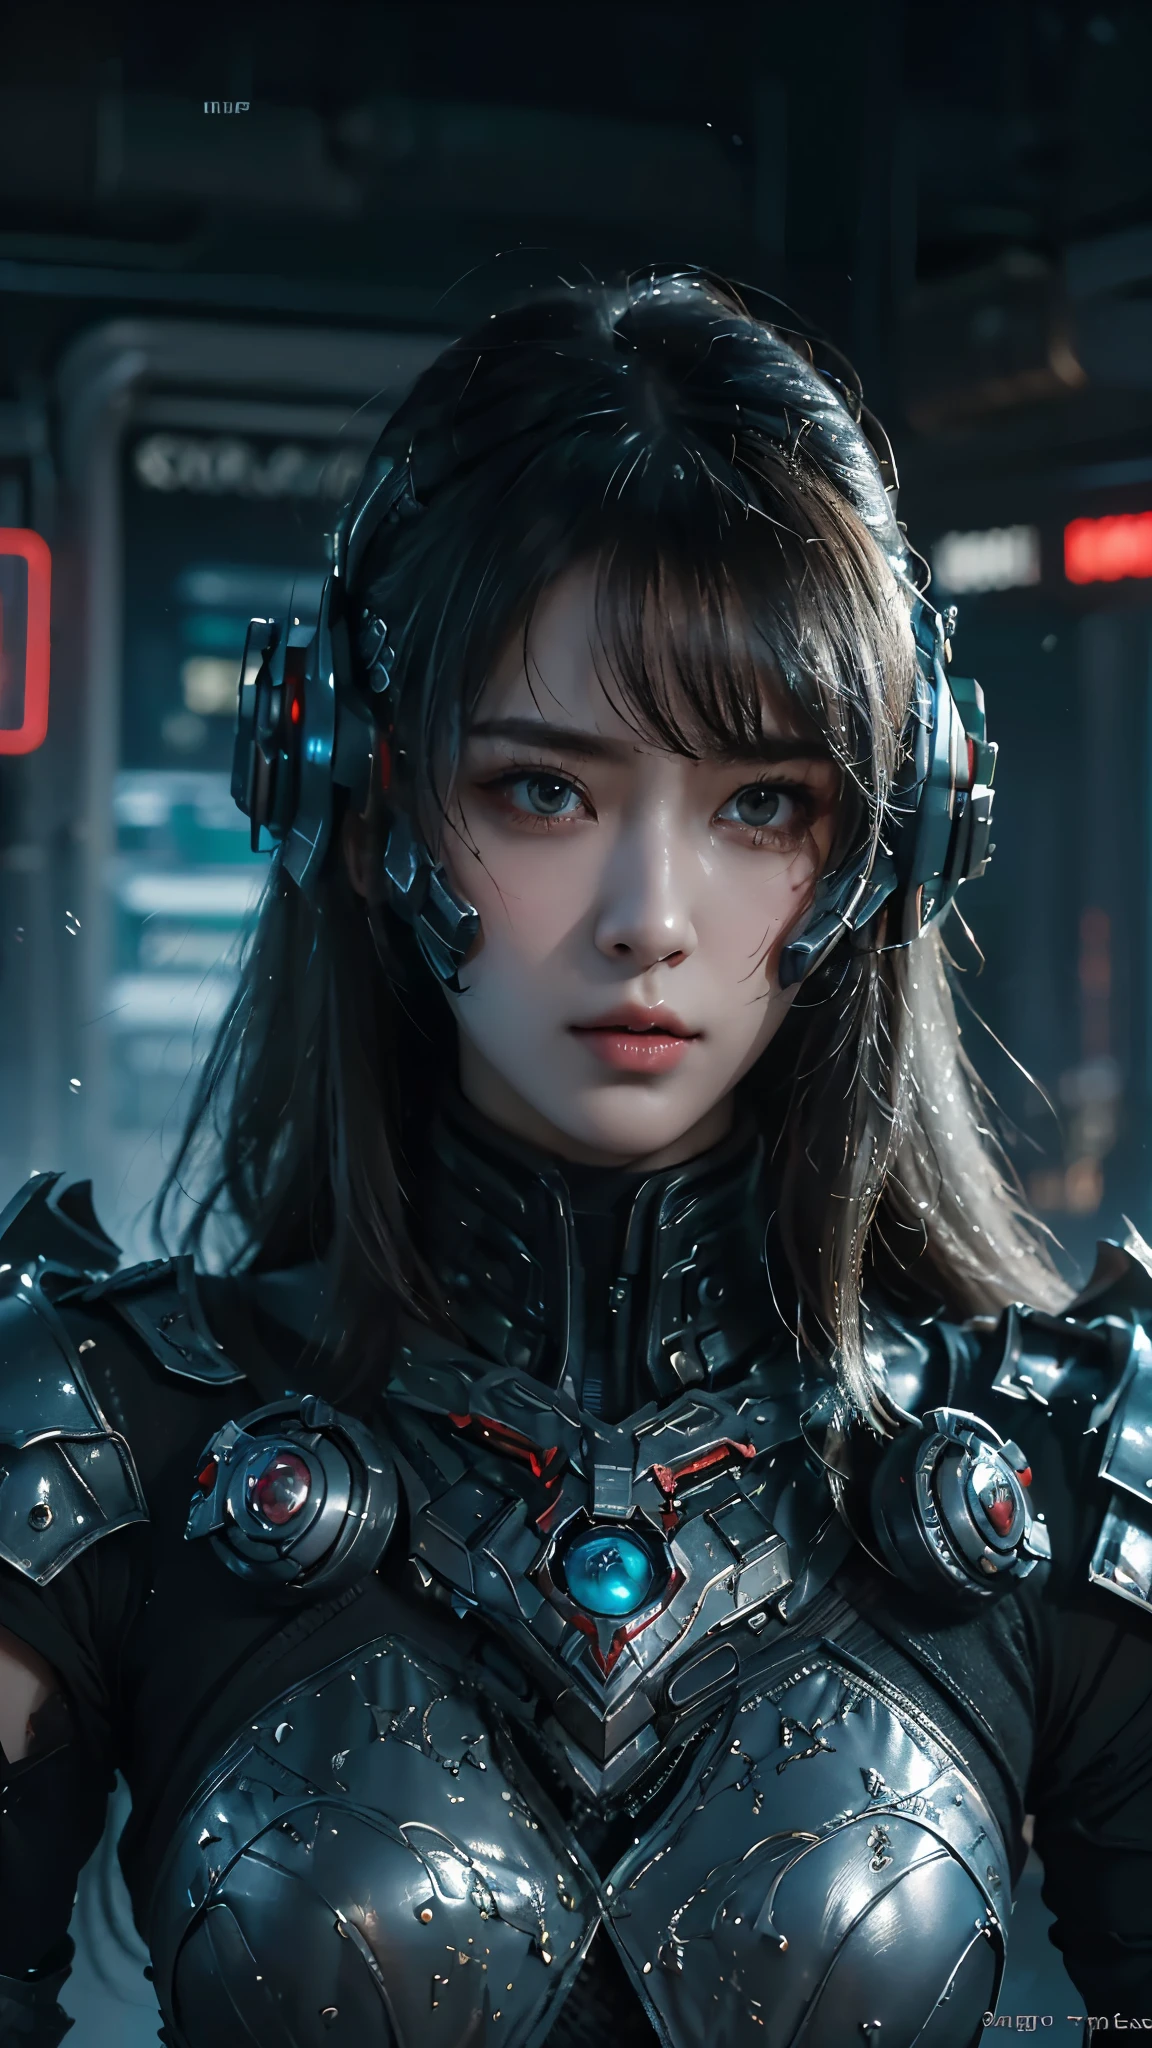 tmasterpiece,Best quality,A high resolution,8K,(Portrait photograph:1.5),(ROriginal photo),real photograph,digital photography,(Combination of cyberpunk and fantasy style),(Female soldier),20-year-old girl,random hair style,By bangs,(Red eyeigchest, accessories,Keep one's mouth shut,elegant and charming,Serious and arrogant,Calm and handsome,(Cyberpunk combined with fantasy style clothing,Openwork design,joint armor,Combat uniformposing your navel,Photo pose,Realisticstyle,gray world background,oc render reflection texture